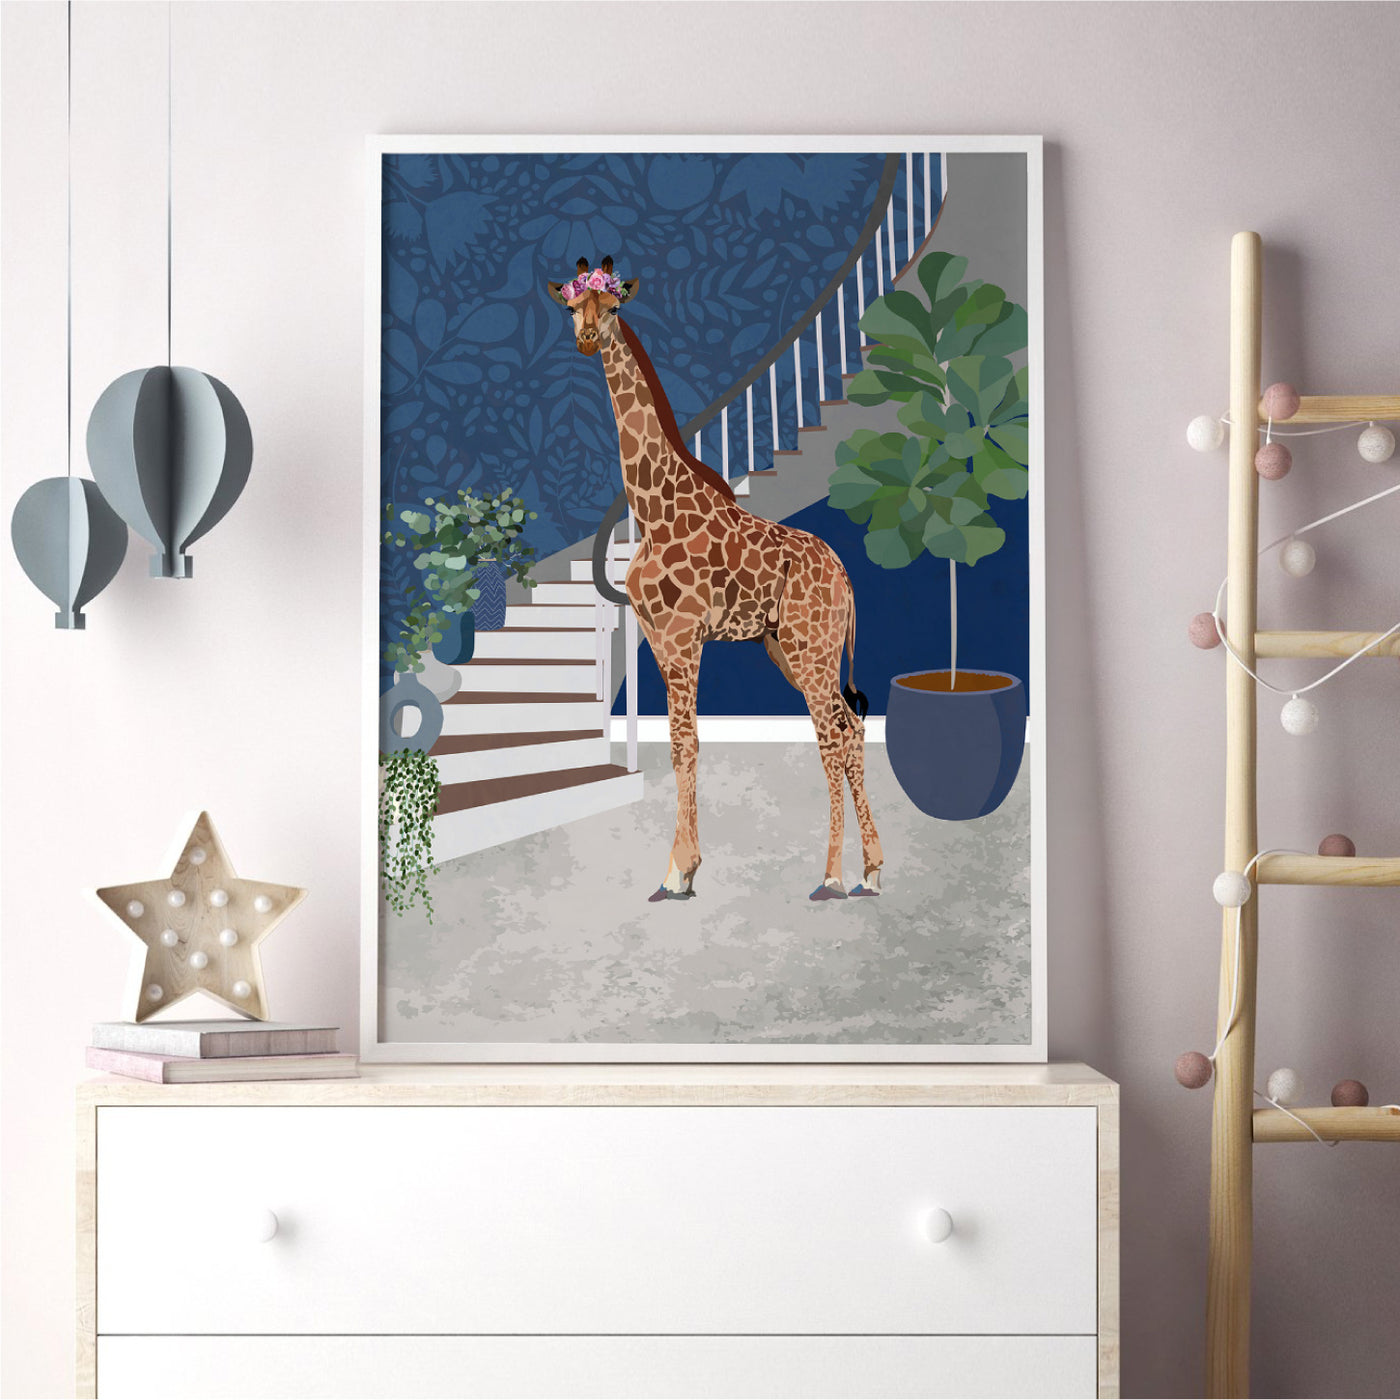 Giraffe in the House - Art Print, Poster, Stretched Canvas or Framed Wall Art Prints, shown framed in a room